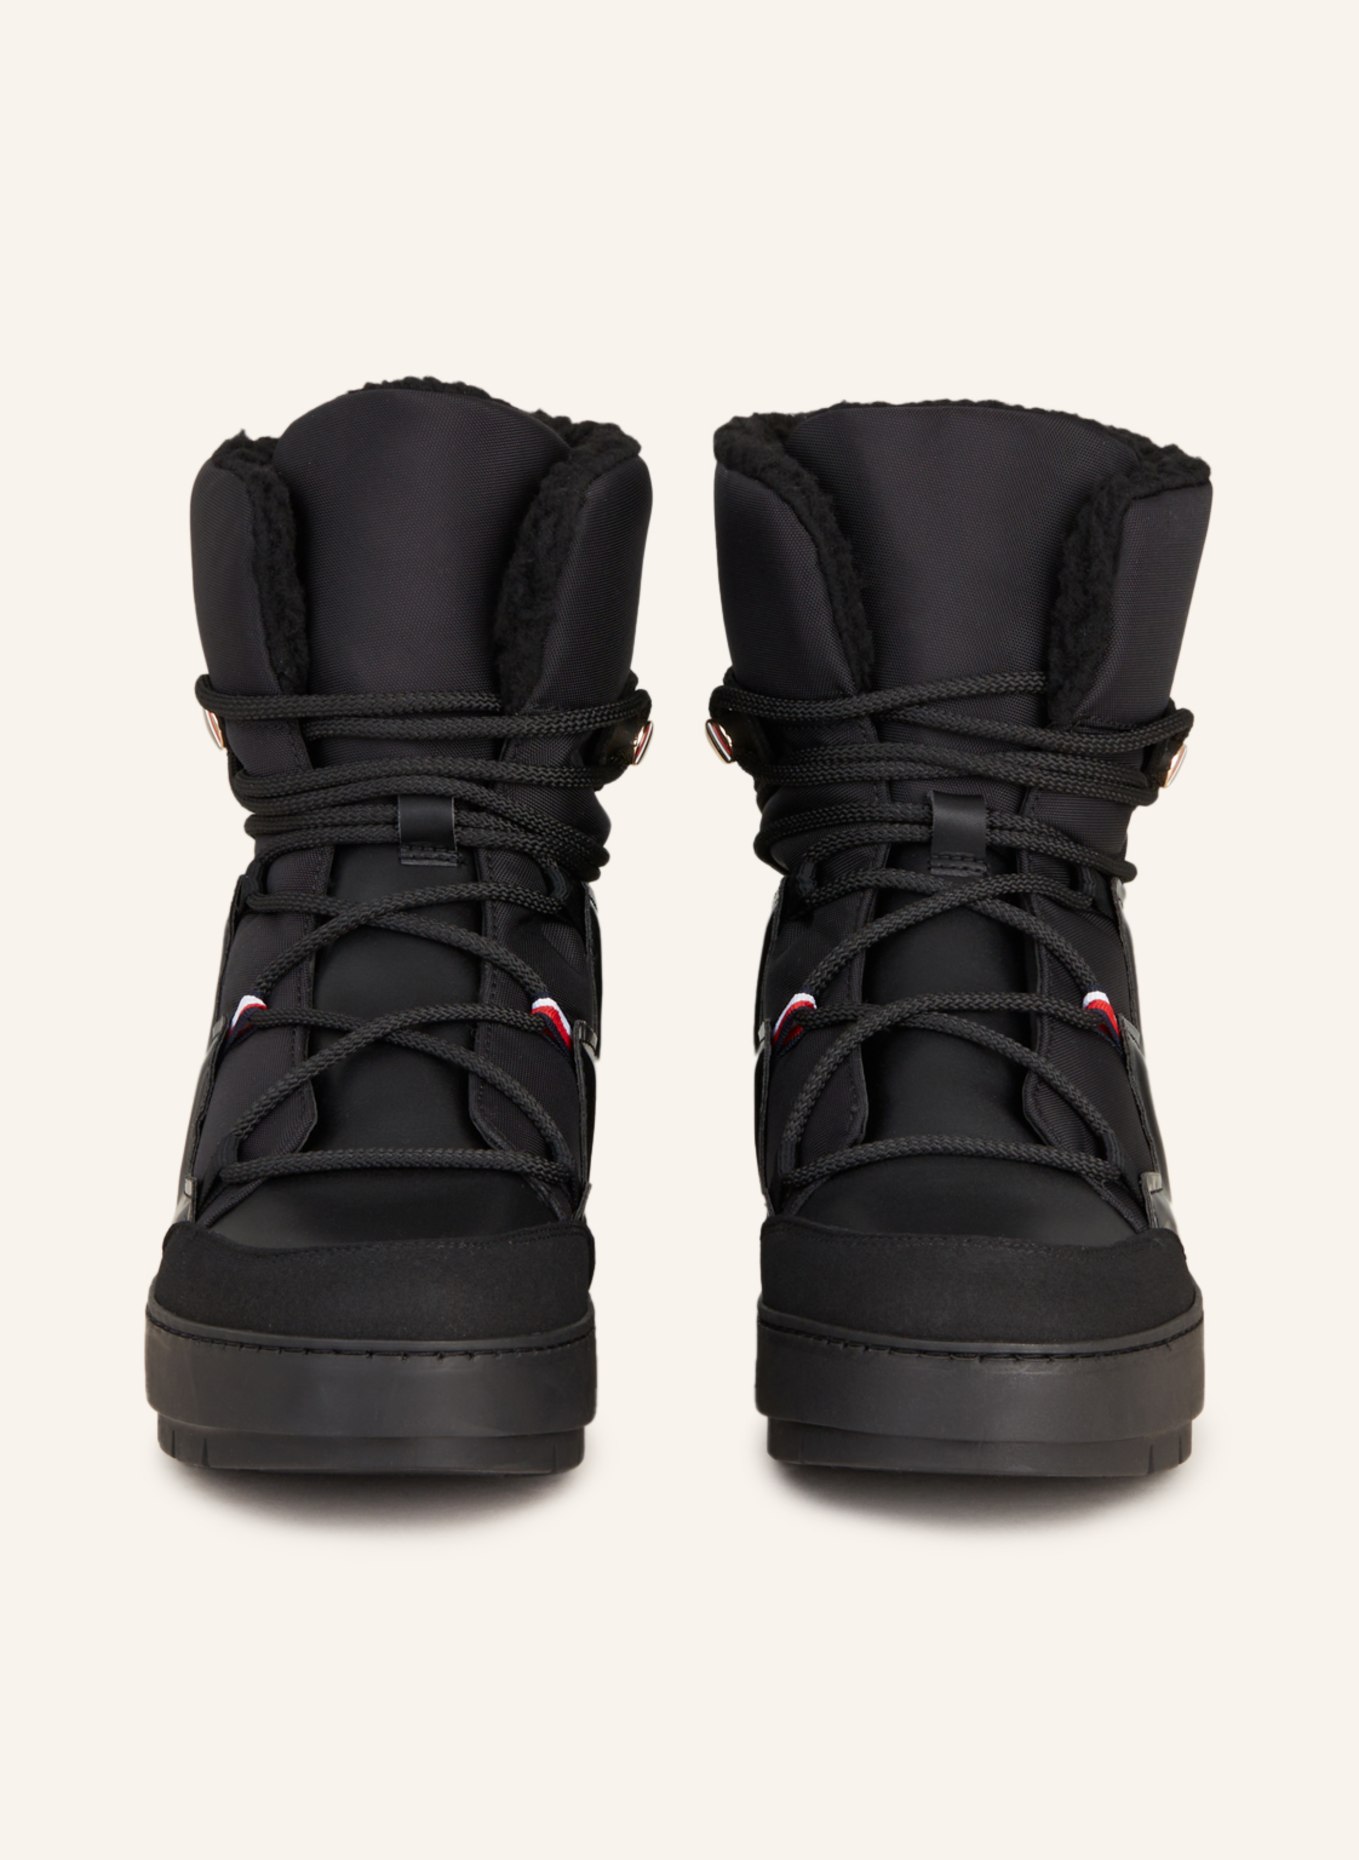 TOMMY HILFIGER boots black Lace-up in